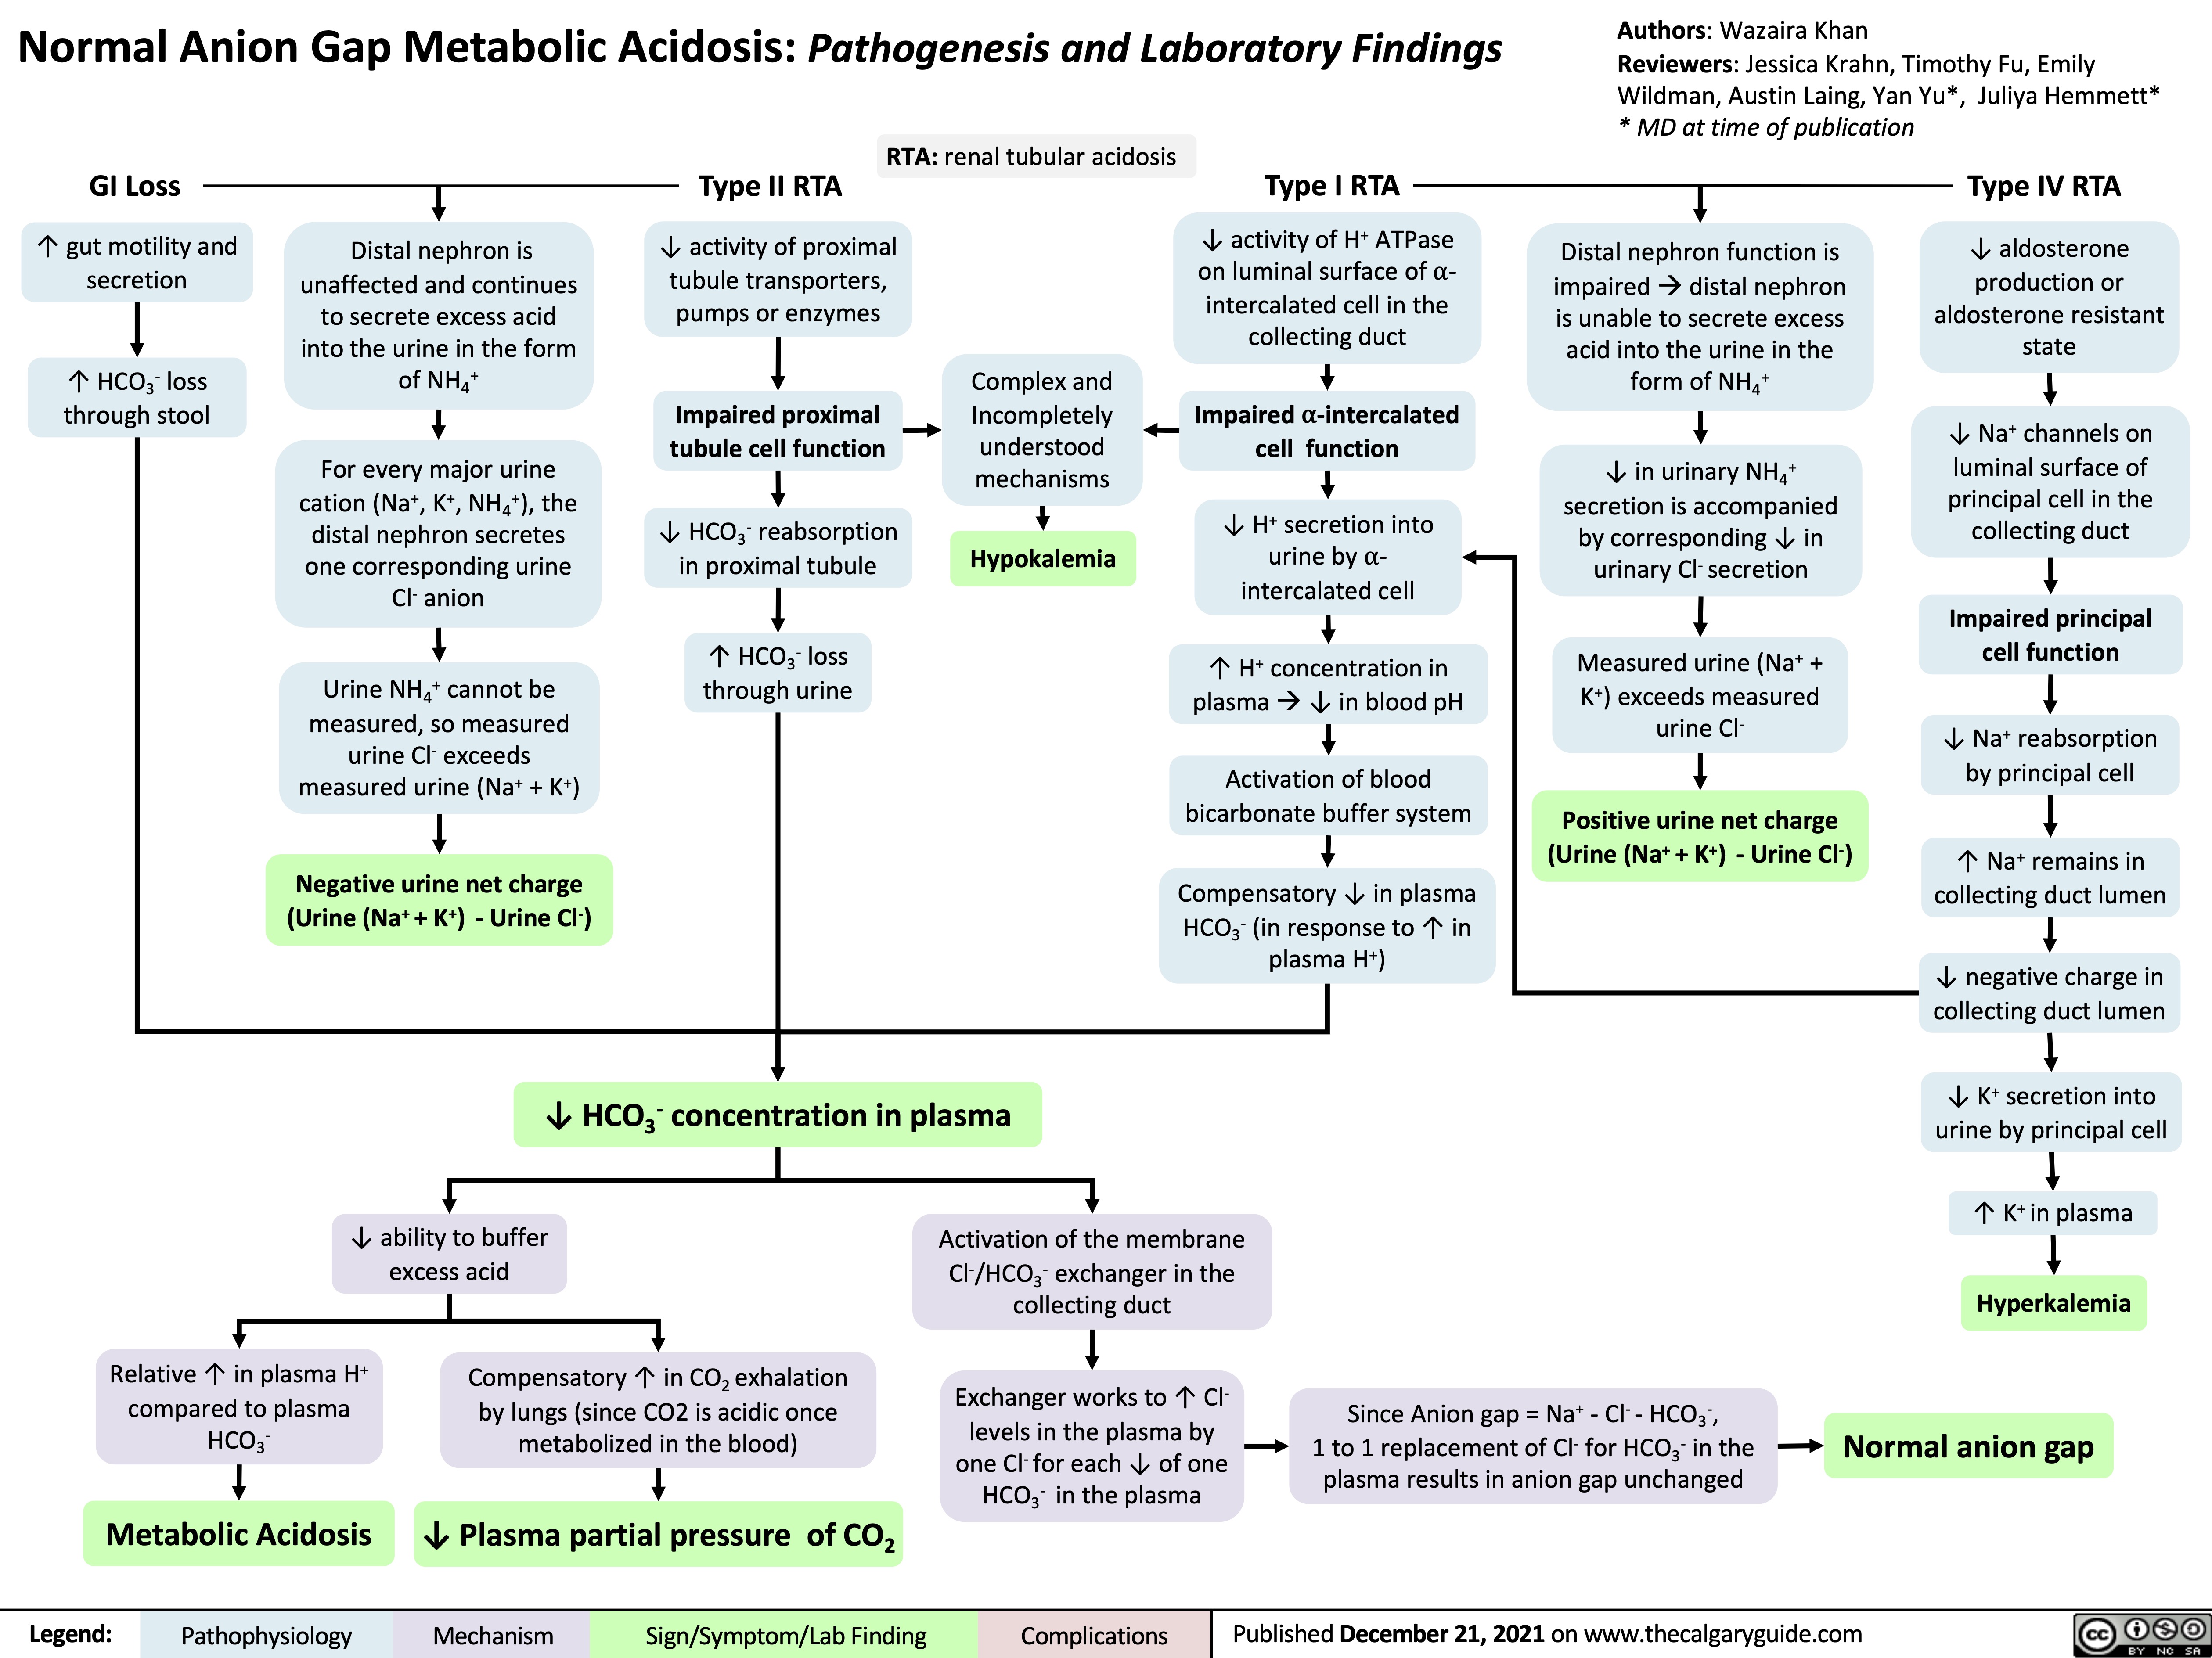 Normal Anion Gap Metabolic Acidosis: Pathogenesis and Laboratory Findings
Authors: Wazaira Khan
Reviewers: Jessica Krahn, Timothy Fu, Emily Wildman, Austin Laing, Yan Yu*, Juliya Hemmett* * MD at time of publication
     GI Loss
↑ gut motility and secretion
↑ HCO3- loss through stool
Distal nephron is unaffected and continues to secrete excess acid into the urine in the form of NH4+
For every major urine cation (Na+, K+, NH4+), the distal nephron secretes one corresponding urine Cl- anion
Urine NH4+ cannot be measured, so measured
urine Cl- exceeds measured urine (Na+ + K+)
Negative urine net charge (Urine (Na+ + K+) - Urine Cl-)
Type II RTA RTA: renal tubular acidosis ↓ activity of proximal
Type I RTA
↓ activity of H+ ATPase on luminal surface of ⍺- intercalated cell in the collecting duct
Impaired ⍺-intercalated cell function
↓ H+ secretion into urine by ⍺- intercalated cell
↑ H+ concentration in plasmaà↓ in blood pH
Activation of blood bicarbonate buffer system
Compensatory ↓ in plasma HCO3- (in response to ↑ in plasma H+)
Type IV RTA
↓ aldosterone production or aldosterone resistant state
↓ Na+ channels on luminal surface of principal cell in the collecting duct
Impaired principal cell function
↓ Na+ reabsorption by principal cell
↑ Na+ remains in collecting duct lumen
↓ negative charge in collecting duct lumen
↓ K+ secretion into urine by principal cell
↑ K+ in plasma
Hyperkalemia
Normal anion gap
        tubule transporters, pumps or enzymes
Impaired proximal tubule cell function
reabsorption
Complex and Incompletely understood mechanisms
Hypokalemia
Distal nephron function is impairedàdistal nephron is unable to secrete excess acid into the urine in the form of NH4+
↓ in urinary NH + 4
secretion is accompanied by corresponding ↓ in urinary Cl- secretion
Measured urine (Na+ + K+) exceeds measured urine Cl-
Positive urine net charge (Urine (Na+ + K+) - Urine Cl-)
          ↓ HCO3
-
in proximal tubule
     ↑ HCO3- loss through urine
            ↓ HCO3- concentration in plasma
    Relative ↑ in plasma H+ compared to plasma HCO3-
Compensatory ↑ in CO2 exhalation by lungs (since CO2 is acidic once metabolized in the blood)
Since Anion gap = Na+ - Cl- - HCO3-,
1 to 1 replacement of Cl- for HCO - in the 3
plasma results in anion gap unchanged
↓ ability to buffer excess acid
Activation of the membrane Cl-/HCO3- exchanger in the collecting duct
Exchanger works to ↑ Cl- levels in the plasma by
one Cl- for each ↓ of one HCO3- in the plasma
         Metabolic Acidosis
↓ Plasma partial pressure of CO2
 Legend:
 Pathophysiology
Mechanism
Sign/Symptom/Lab Finding
 Complications
 Published December 21, 2021 on www.thecalgaryguide.com
   